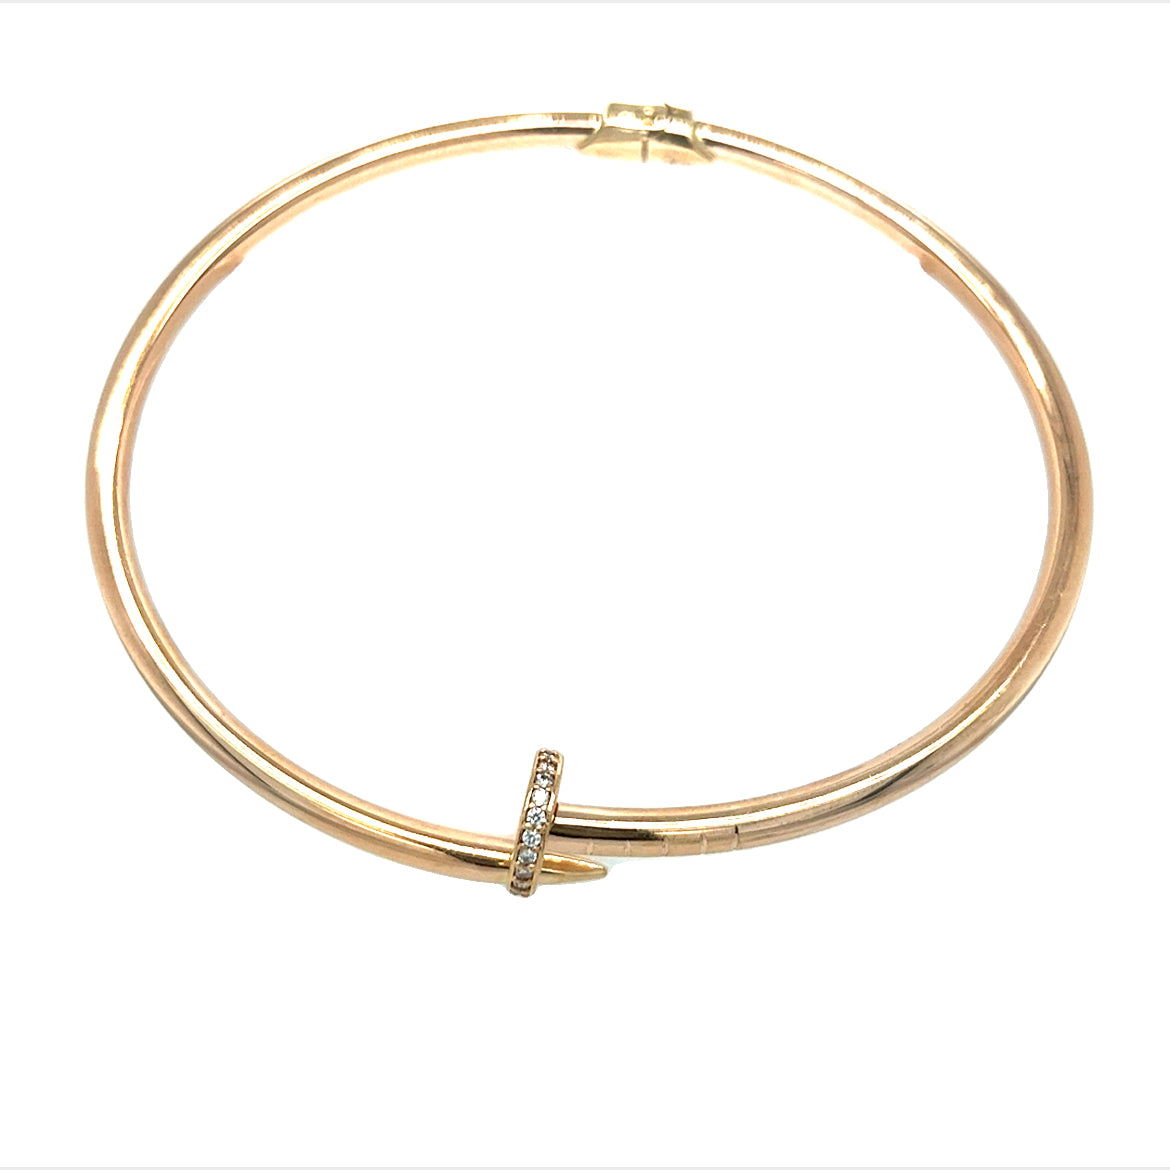 14KT YELLOW GOLD FINE NAIL BANGLE WITH CZ